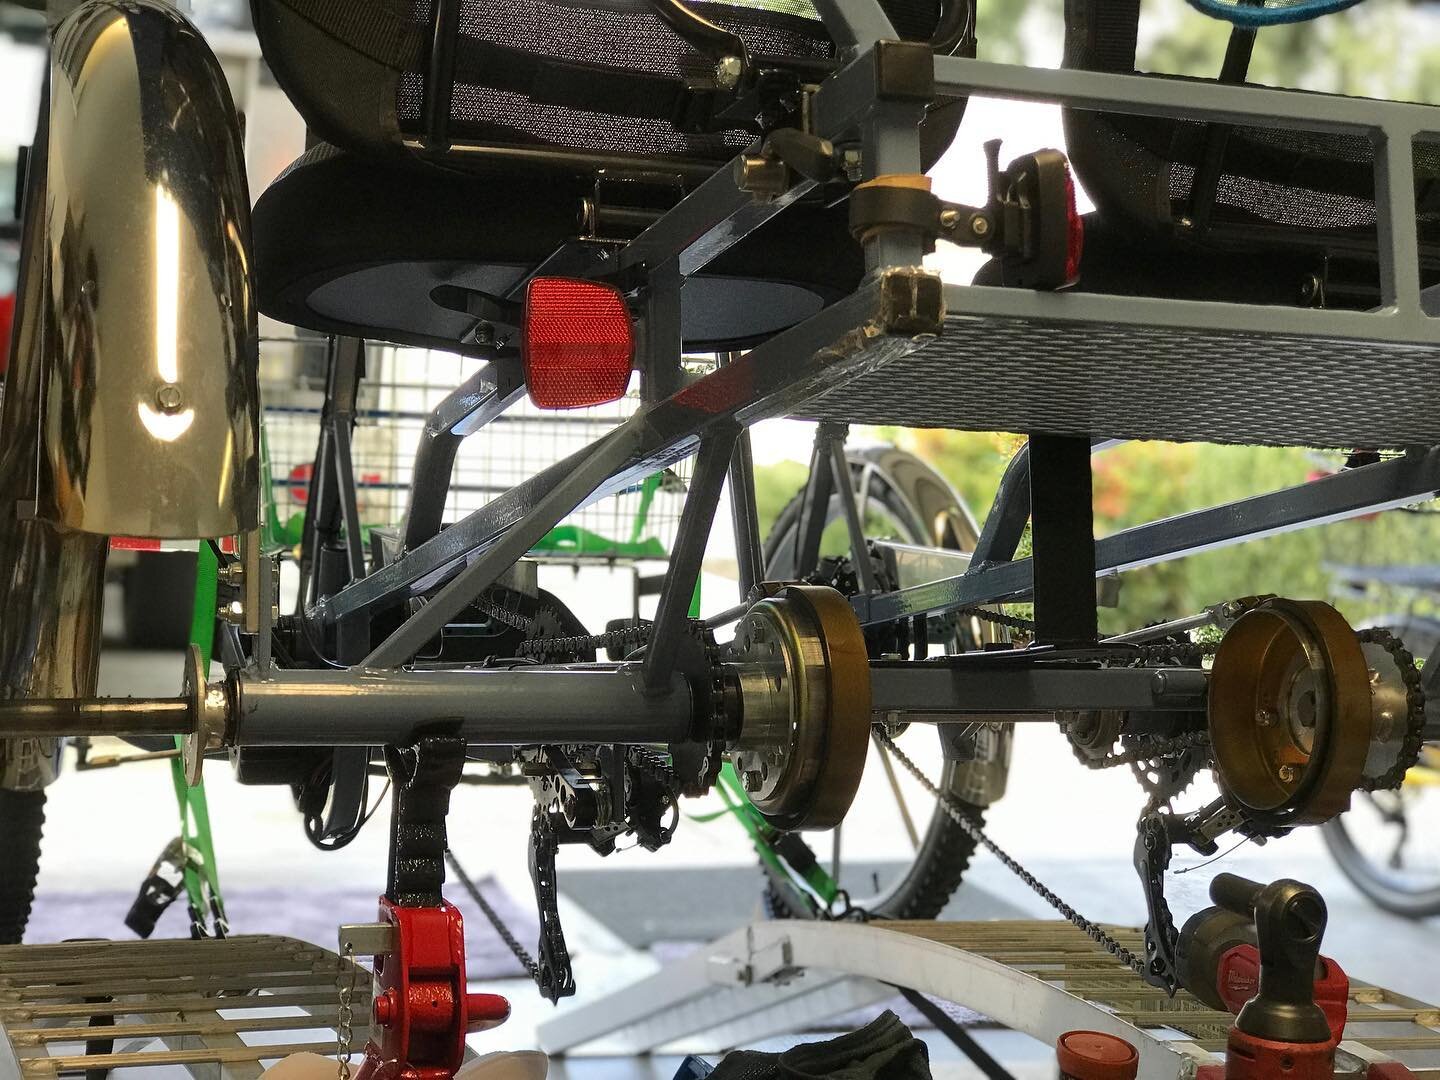 A little zoom out of the undercarriage of the quad cycle.